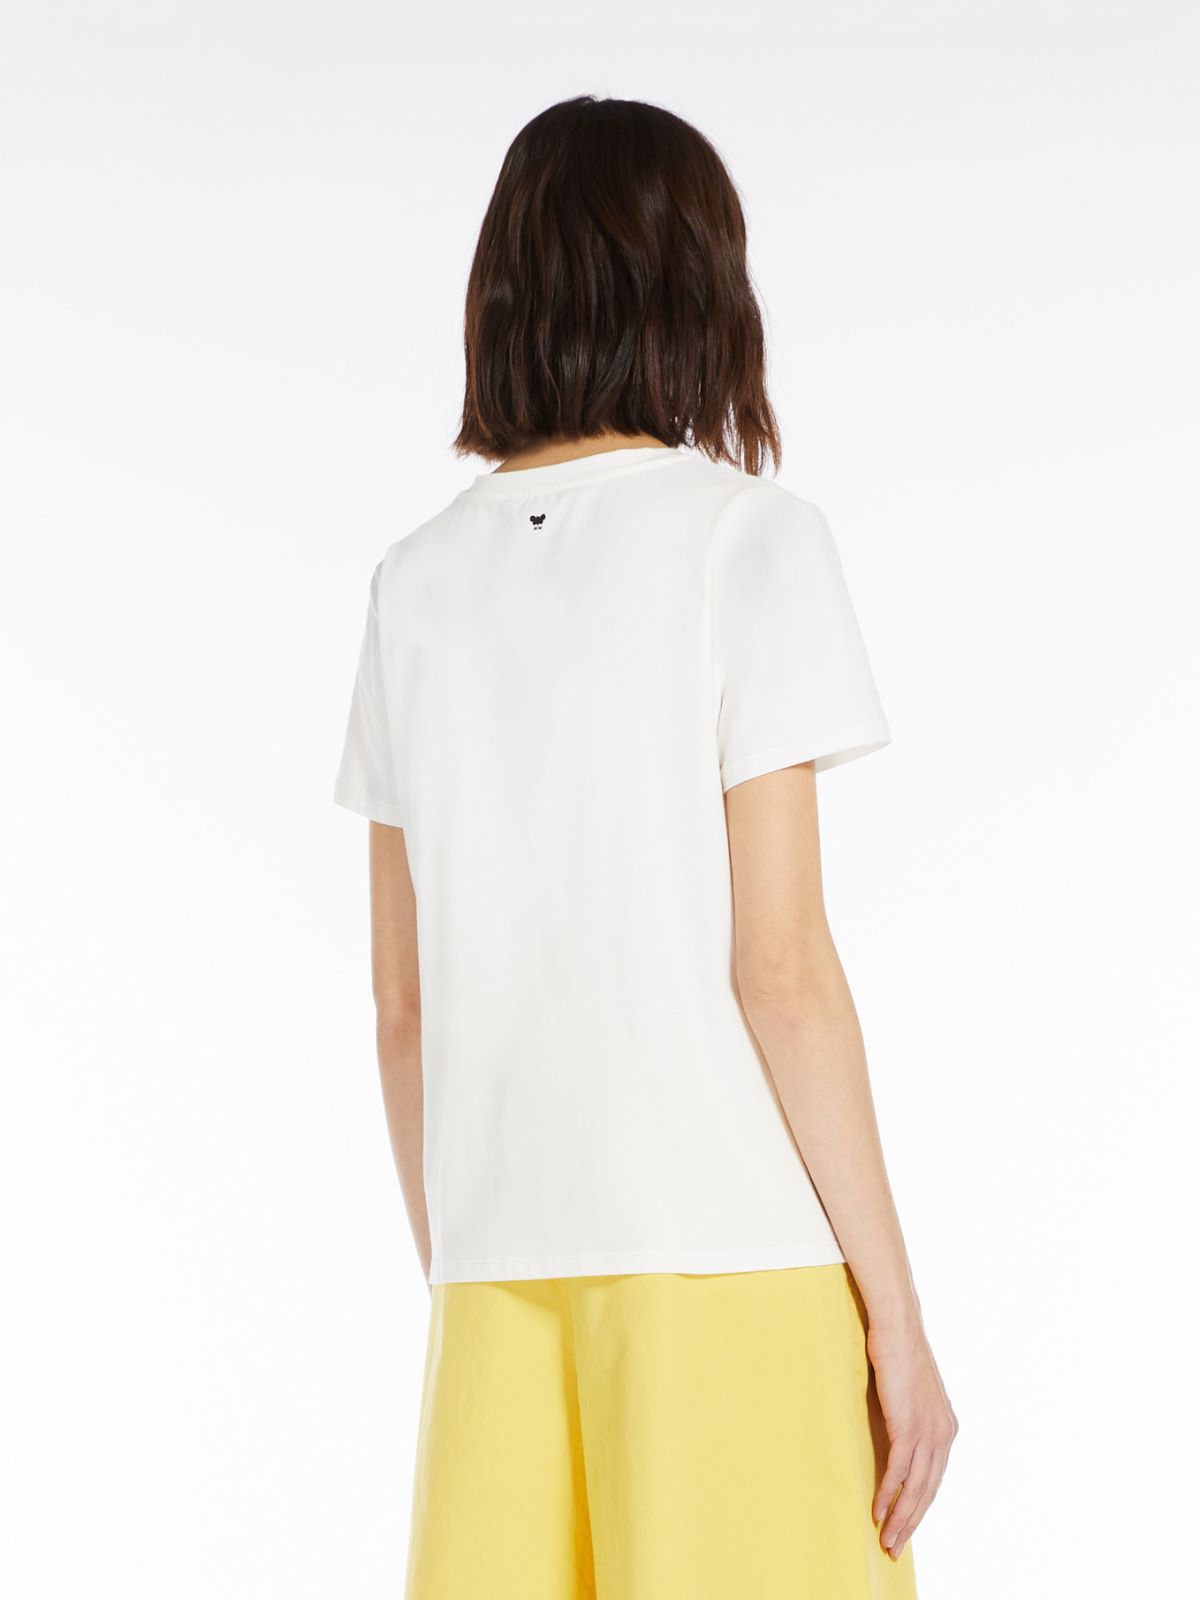 T-shirt in printed jersey - WHITE - Weekend Max Mara - 3